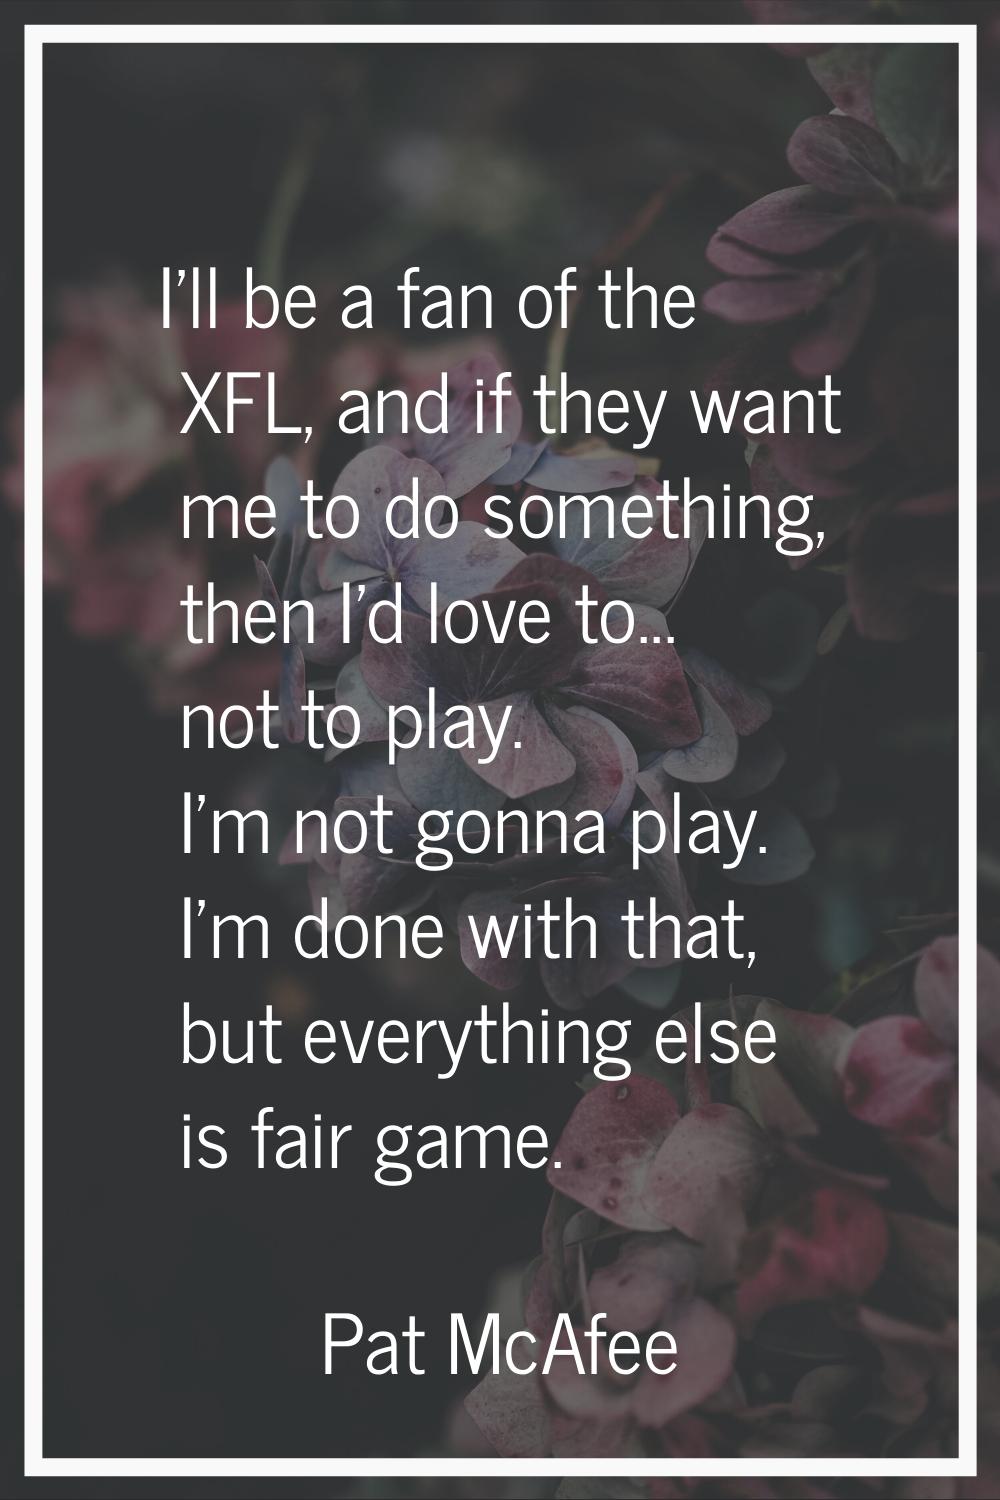 I'll be a fan of the XFL, and if they want me to do something, then I'd love to... not to play. I'm